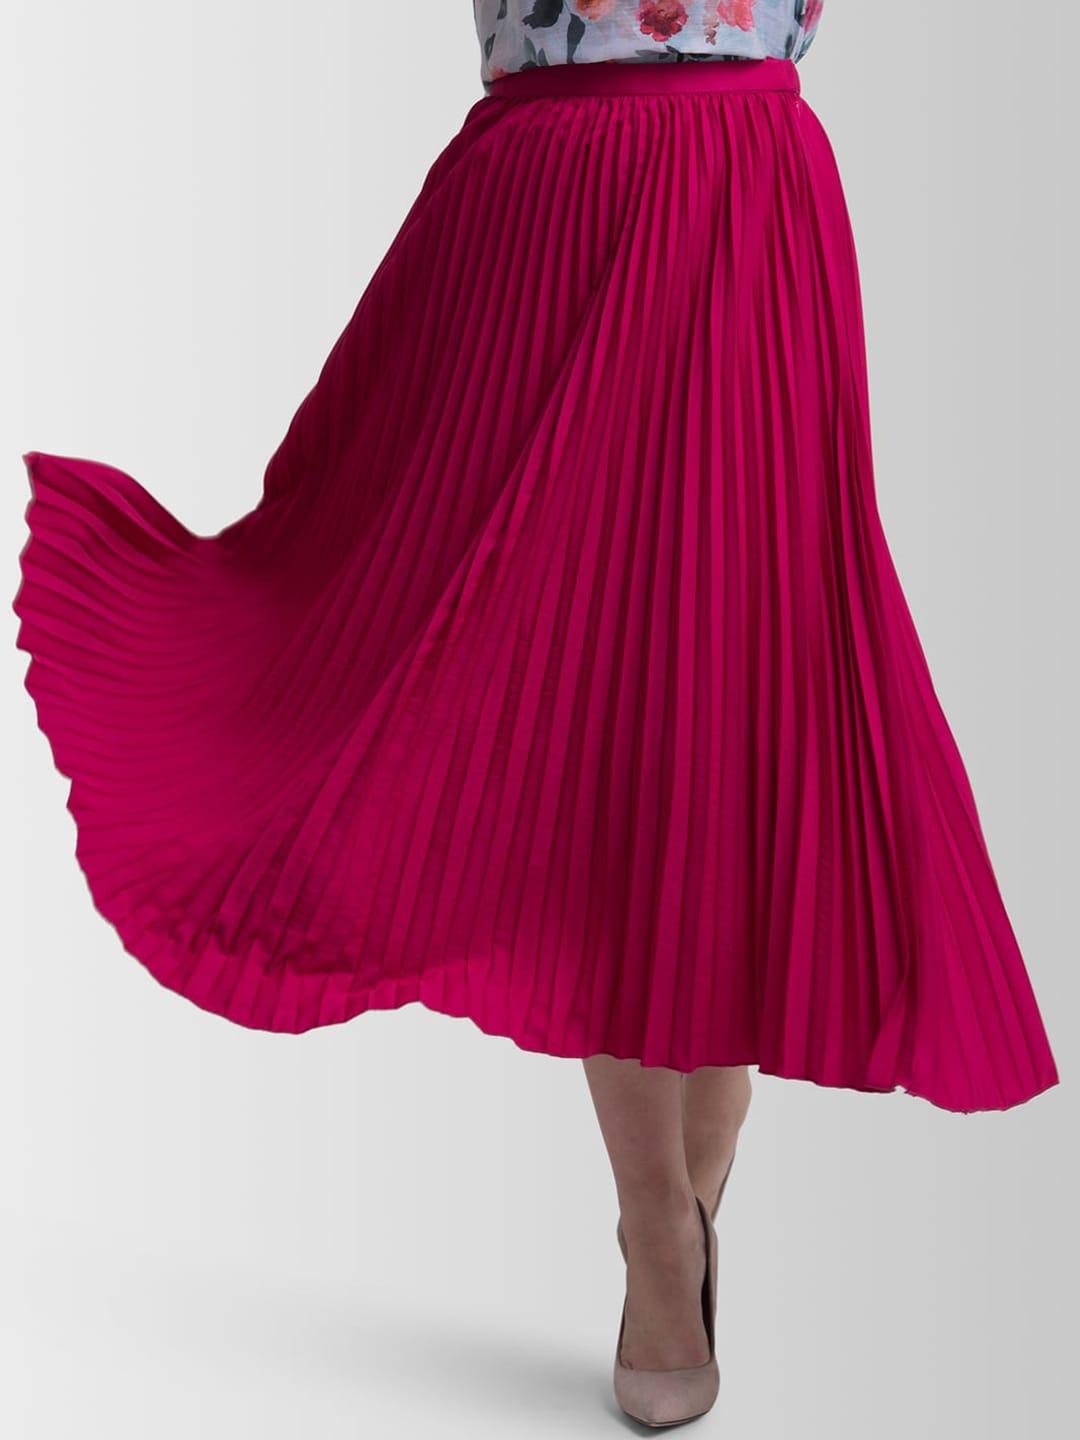 fablestreet-fuchsia-pink-accordian-pleated-flared-skirt